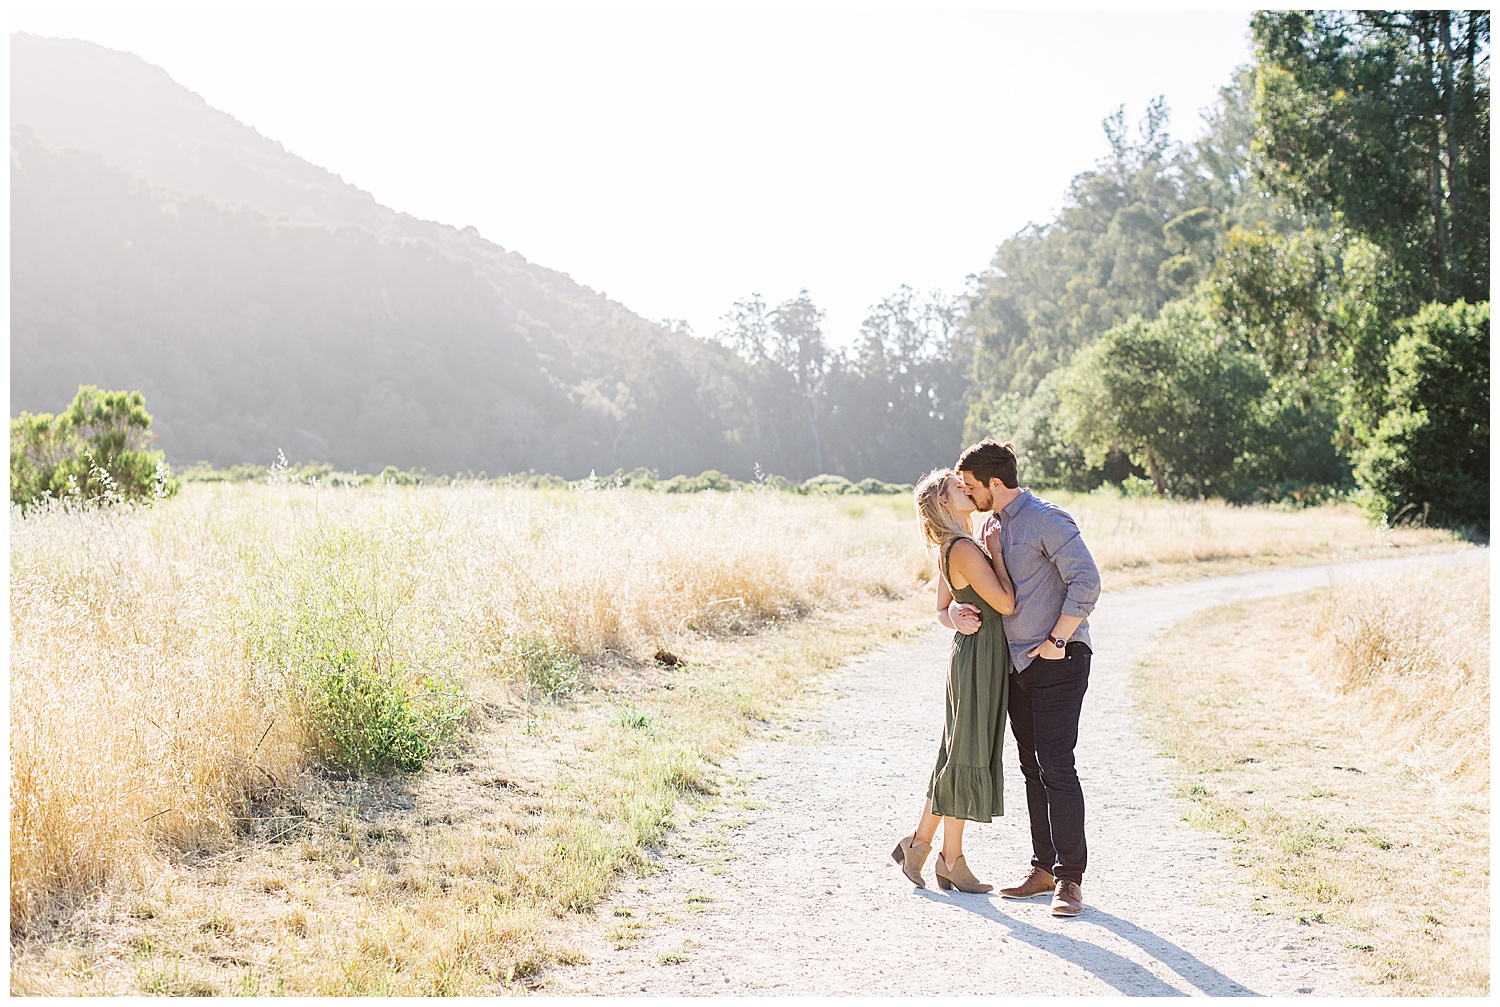 To celebrate their Powerful And Heartfelt Anniversary Session, the couple shares a sweet kiss in a golden field surrounded by trees and mountains by film photographer AGS Photo Art